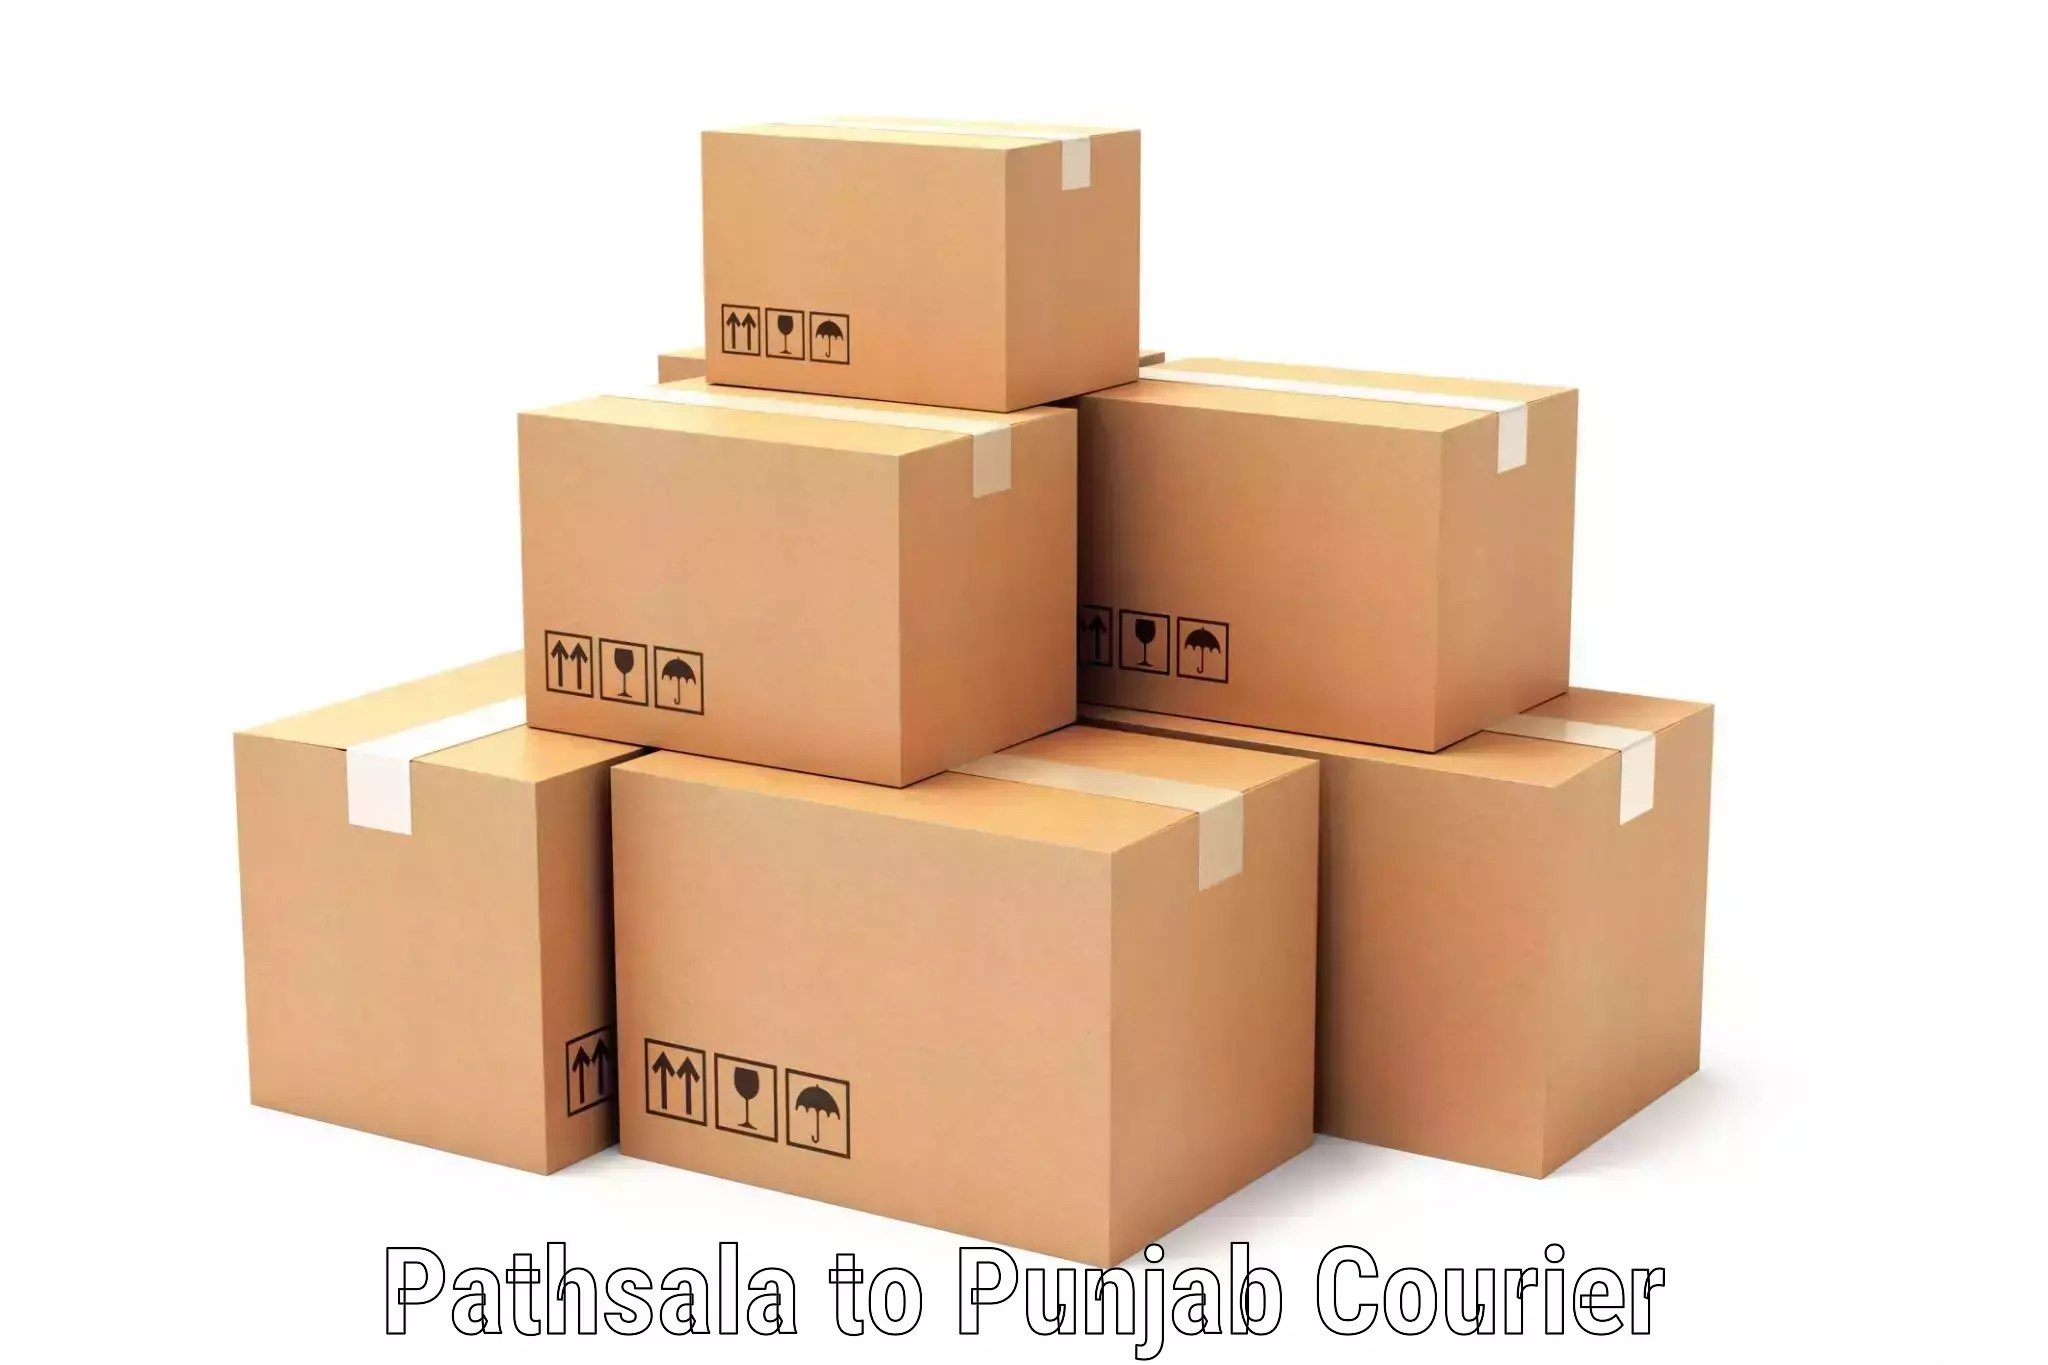 Quality courier partnerships in Pathsala to Punjab